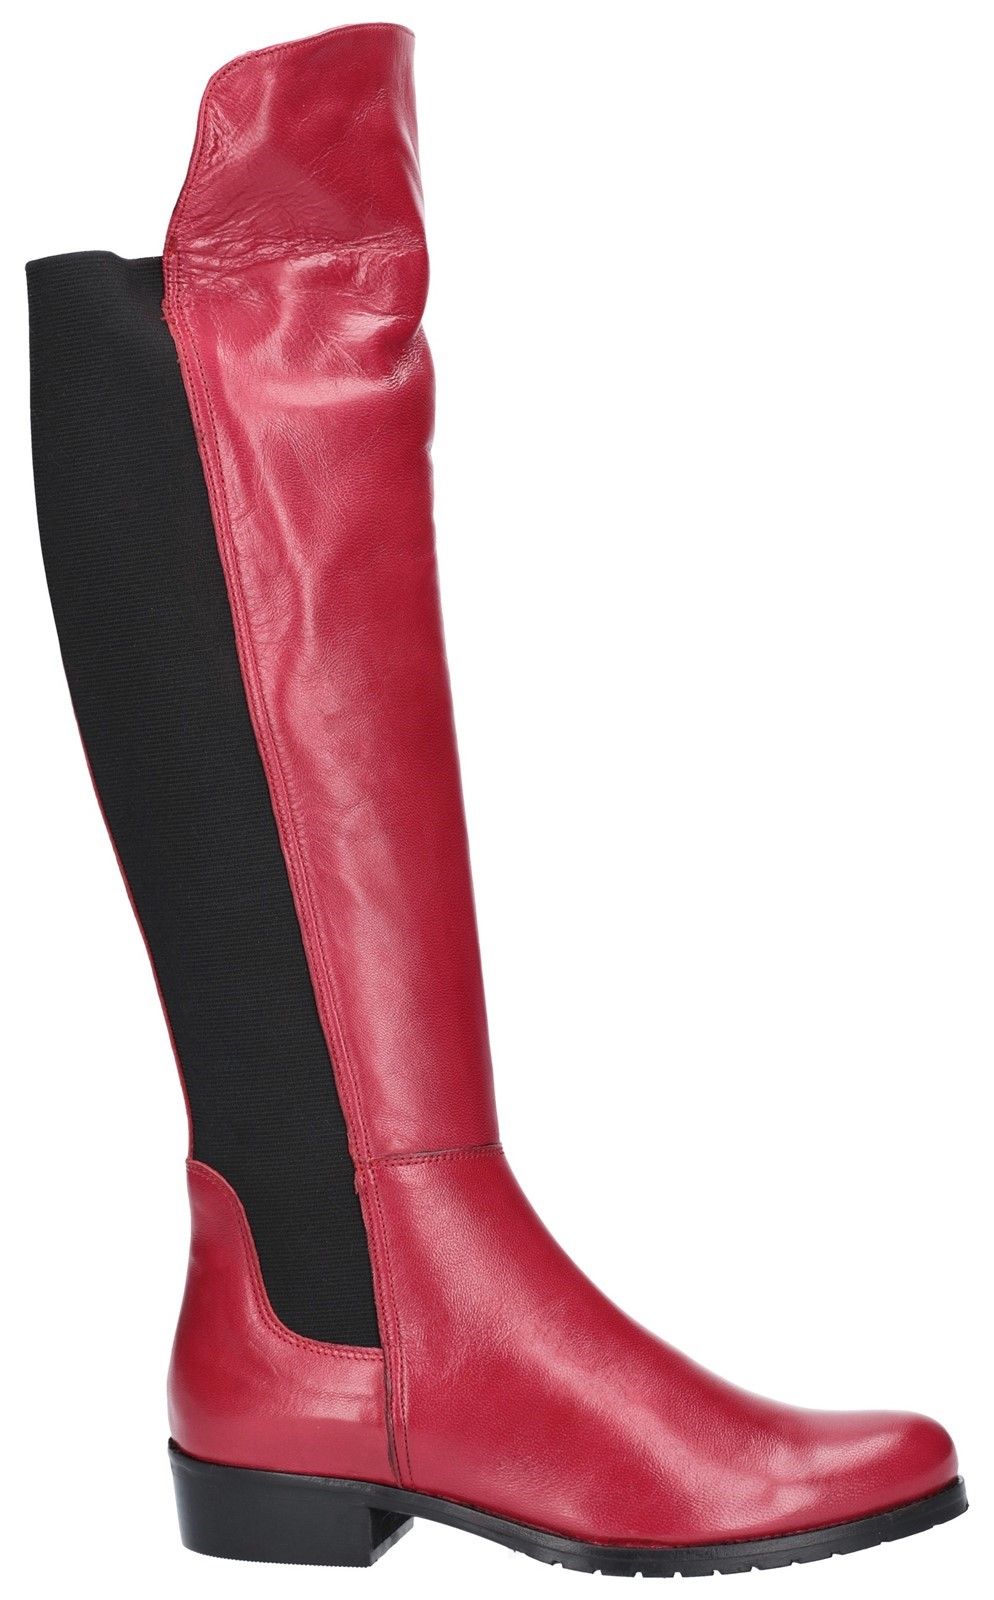 Ladies knee high full grain leather boots with full length elastic panel for comfort.Ladies' knee high leather pull up boots. 
Full grain leather upper. 
Full length elasticated comfort panel. 
Contoured heel stiffener. 
Comfortable rounded toe.